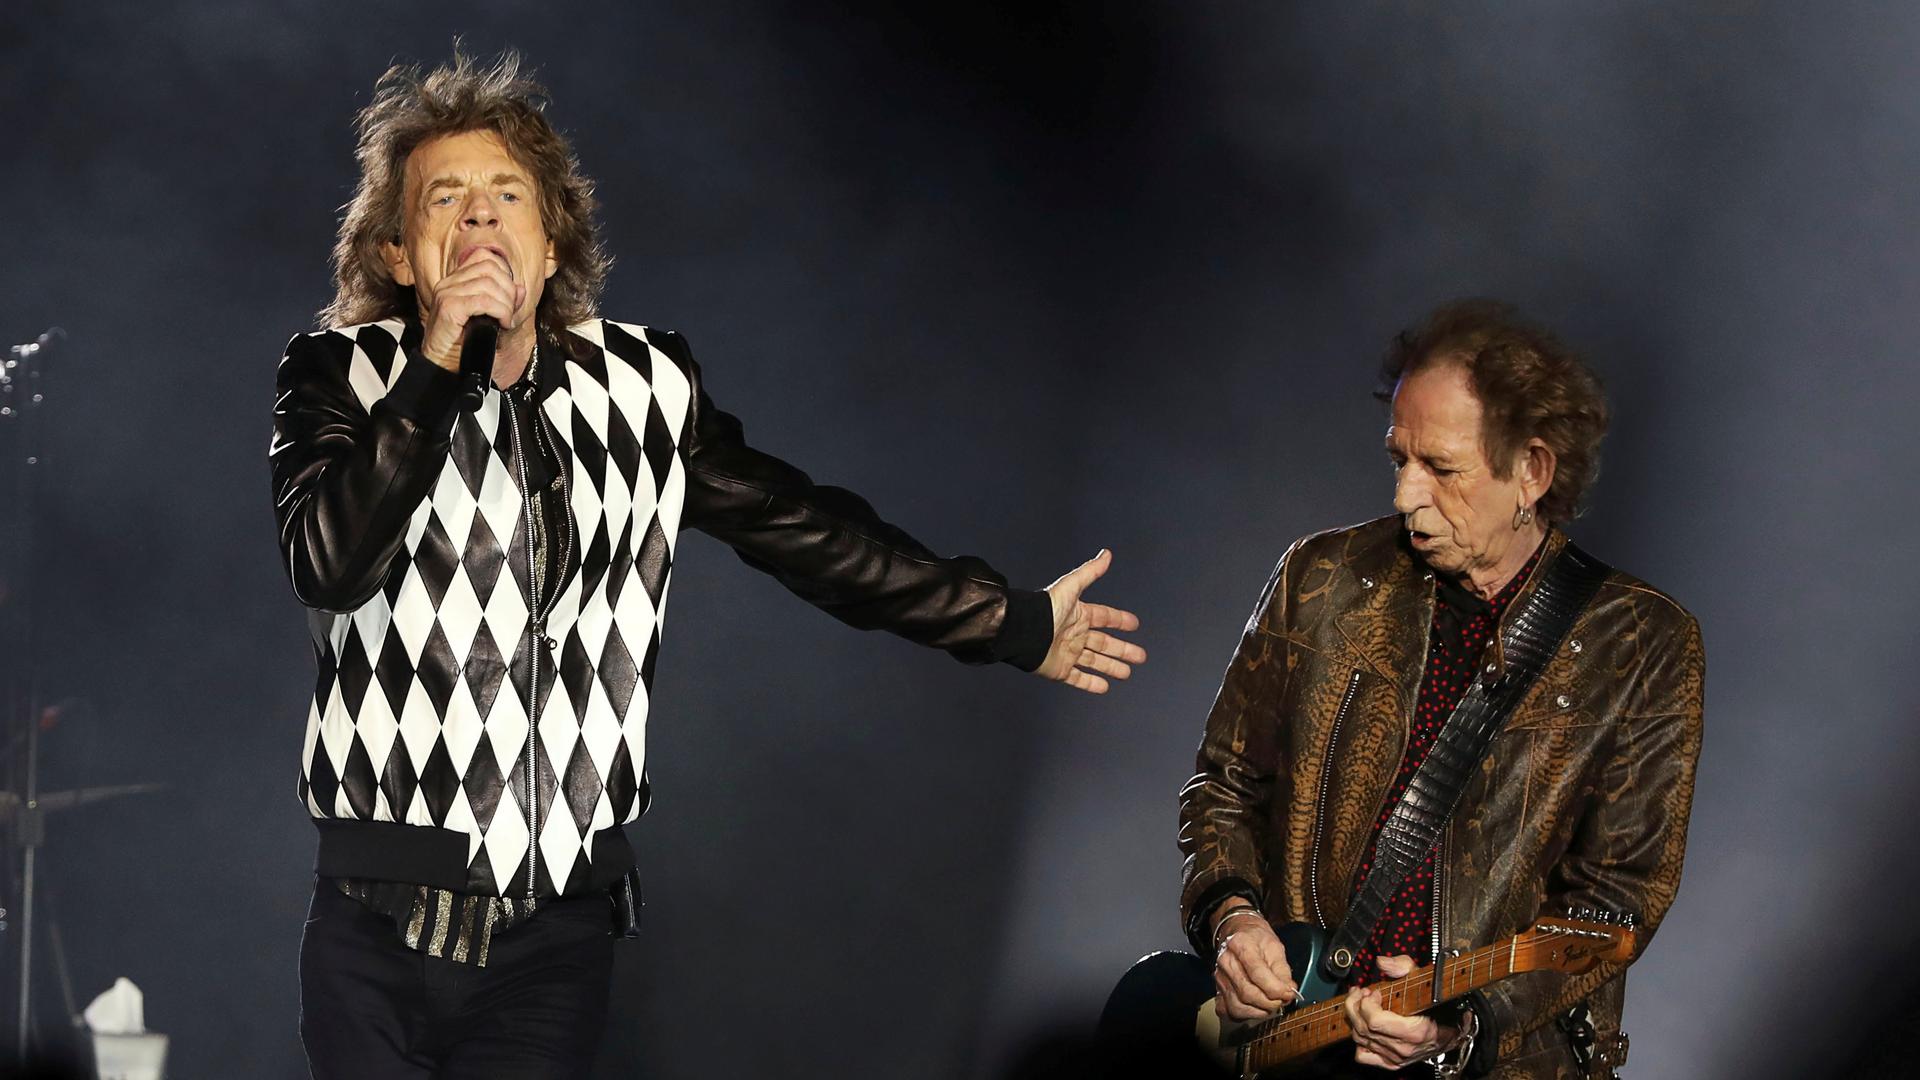 Mick Jagger, left, and guitarist Keith Richards perform during the kick-off show of the Rolling Stones' "No Filter" tour at Soldier Field in Chicago, Illinois, U.S. June 21, 2019. 